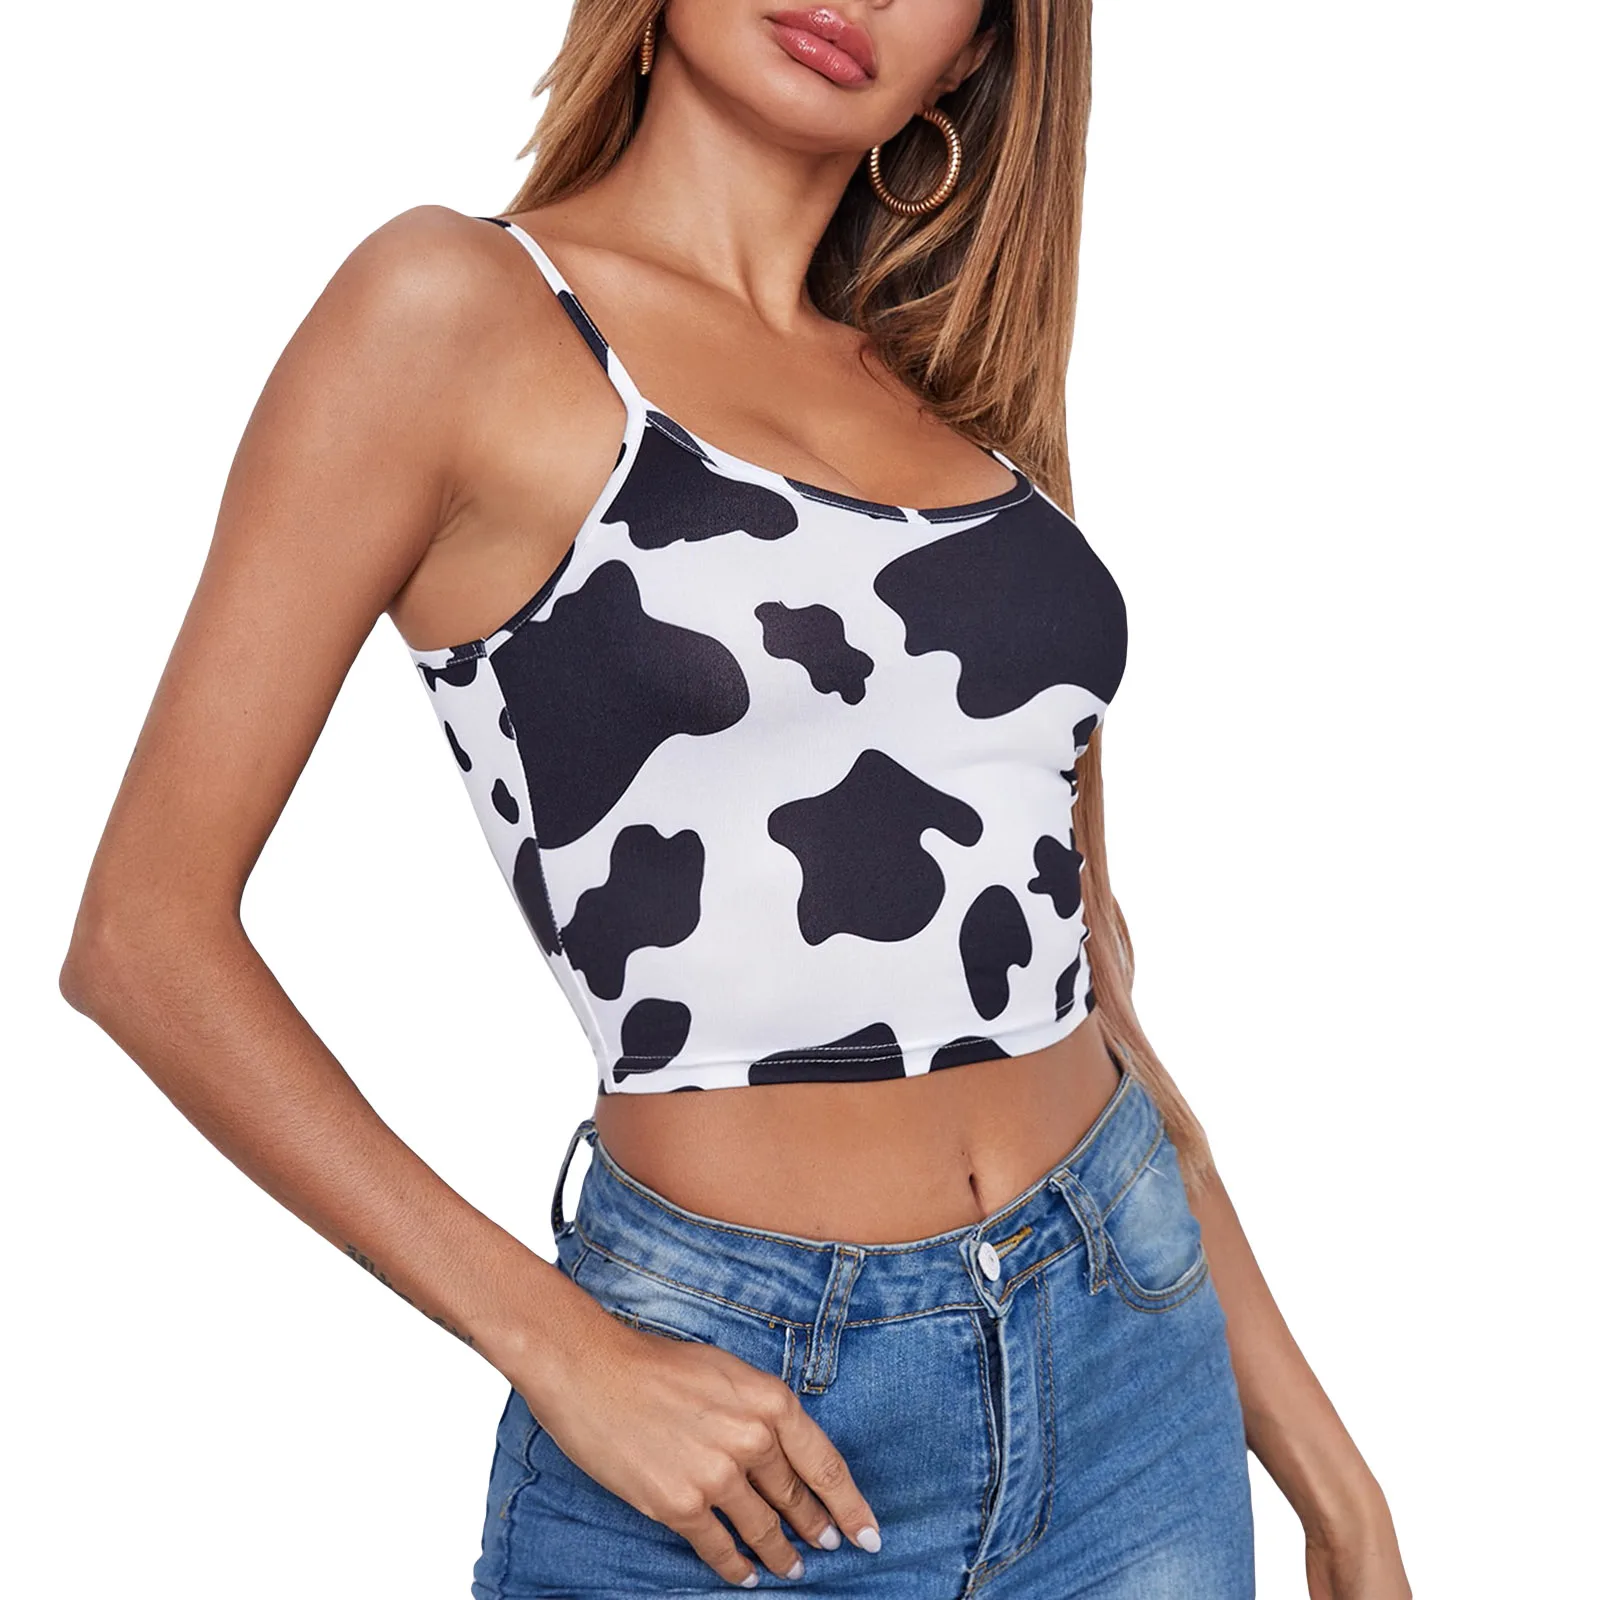 2021 Newest Women's Camisole, Sexy Sleeveless Cow Print Cropped Tops for Party Vacation Travelling Dating silk camisole